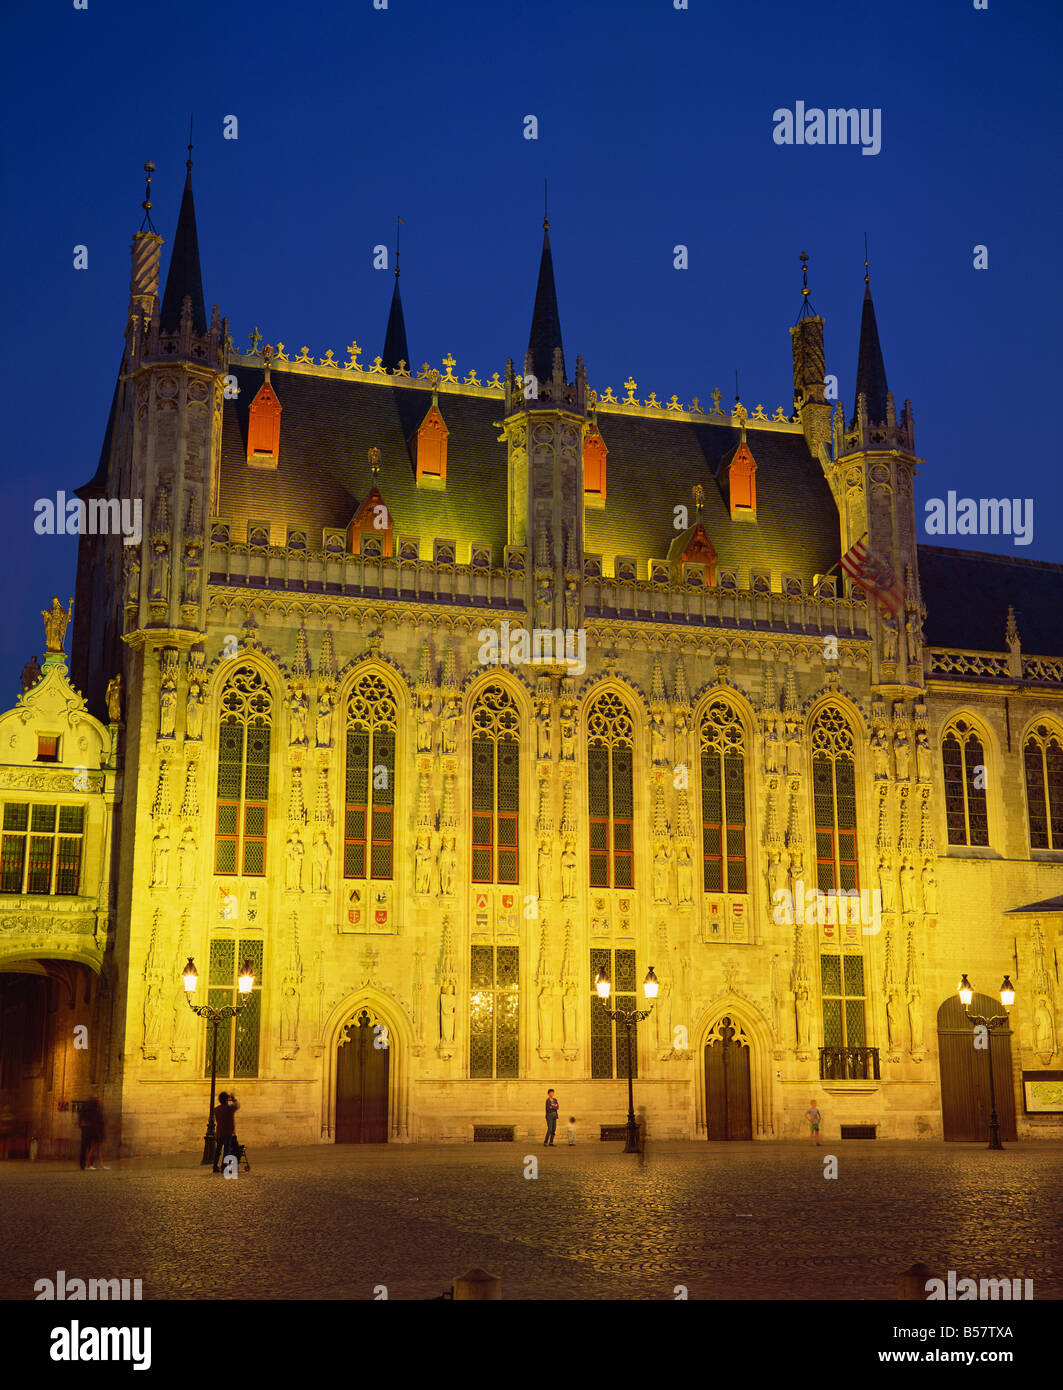 The illuminated facade of the Town Hall in Burg Square in Bruges at night Belgium R Rainford Stock Photo